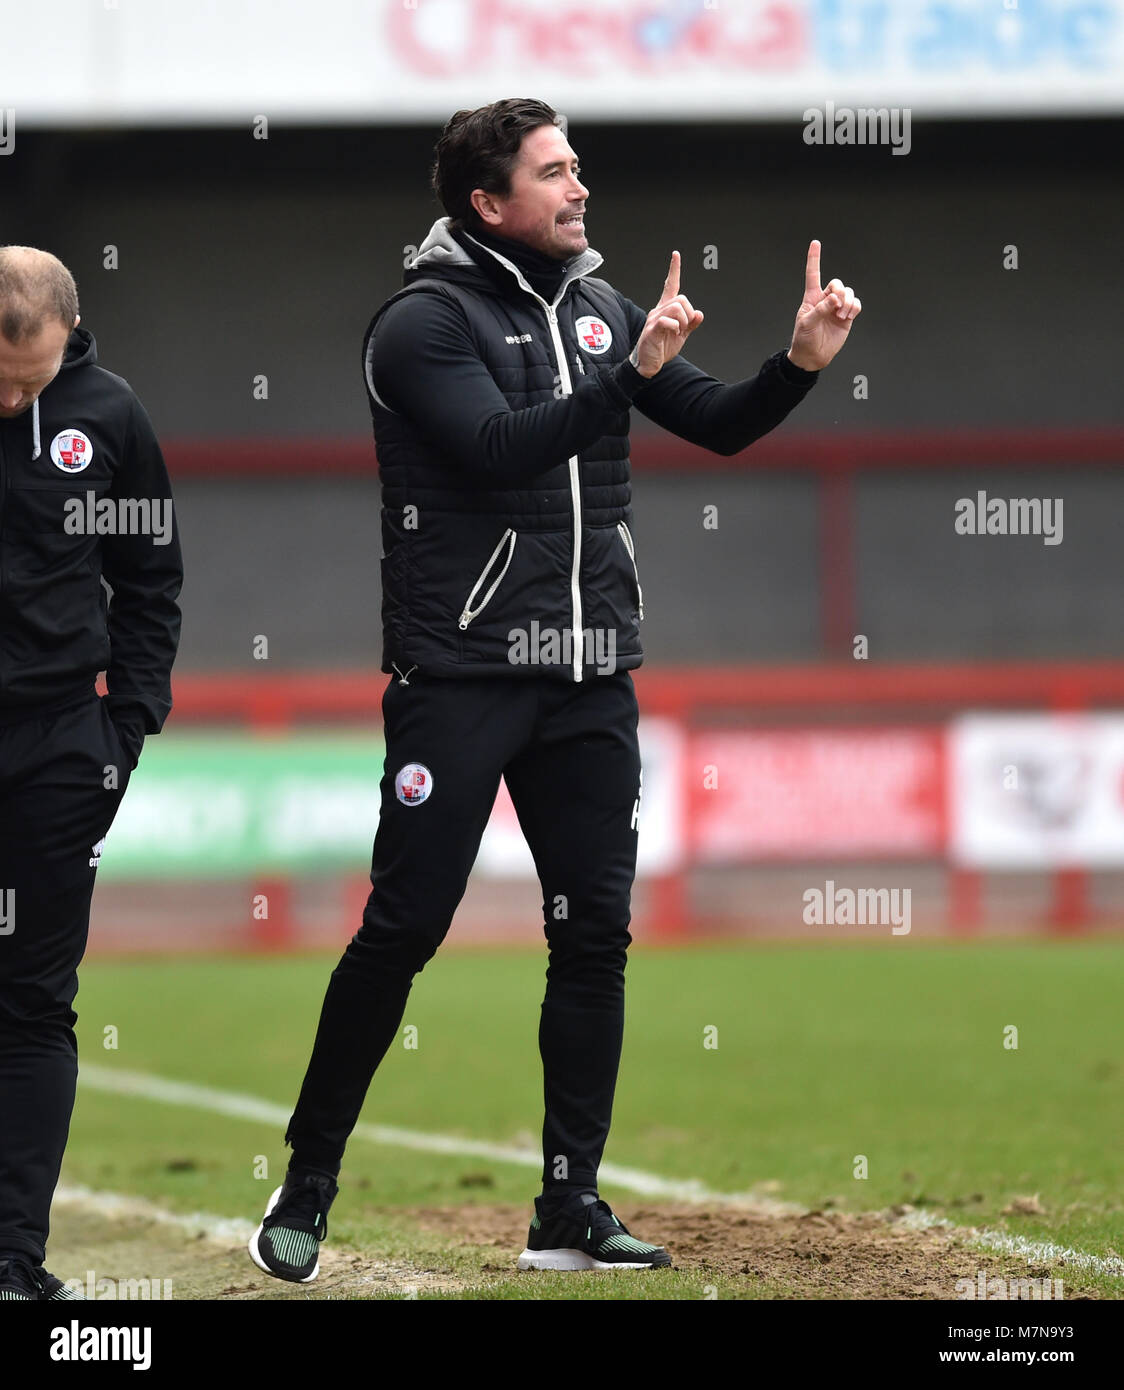 Crawley head coach Harry Kewell during the Sky Bet League 2 match between Crawley Town and Morecambe at the Checkatrade Stadium in Crawley. 10 Mar 2018 - Editorial use only. No merchandising. For Football images FA and Premier League restrictions apply inc. no internet/mobile usage without FAPL license - for details contact Football Dataco Stock Photo